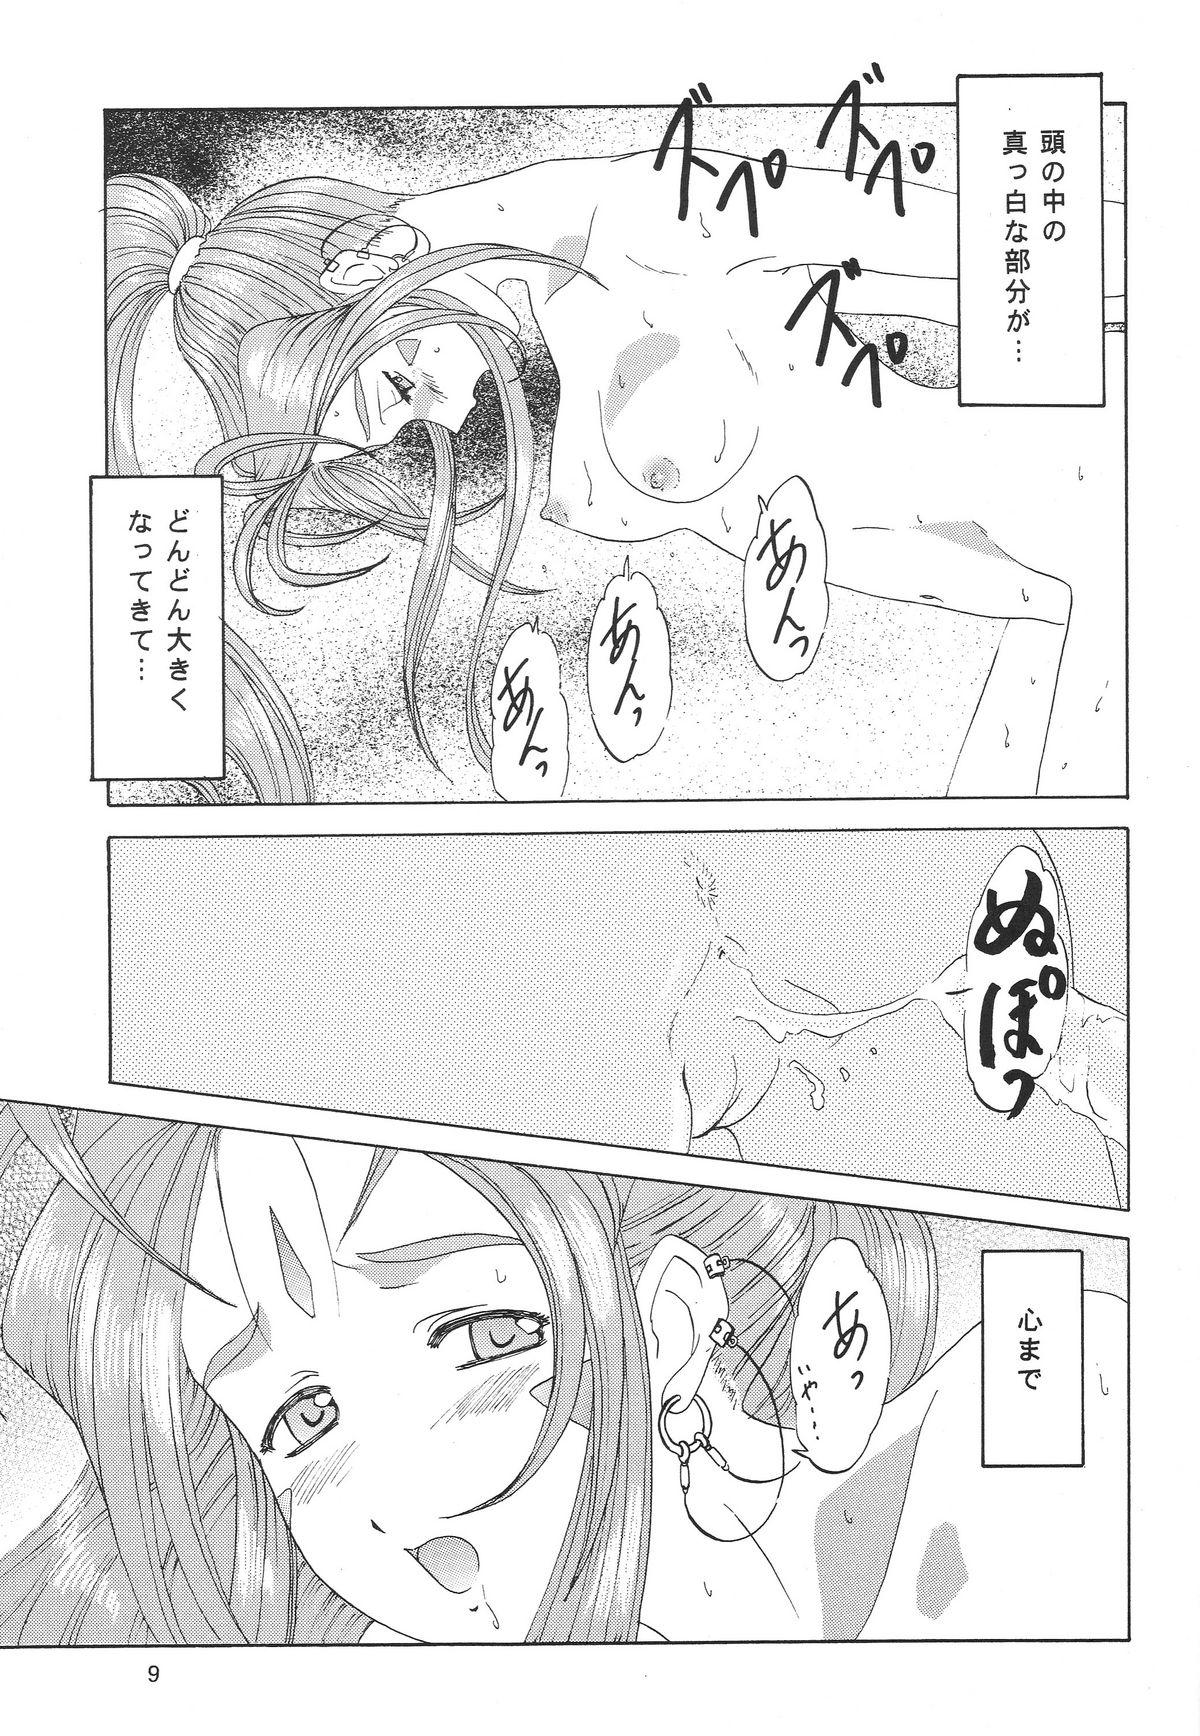 Audition Lunch Box 60 - Angel Waltz 2 - Ah my goddess Smooth - Page 8